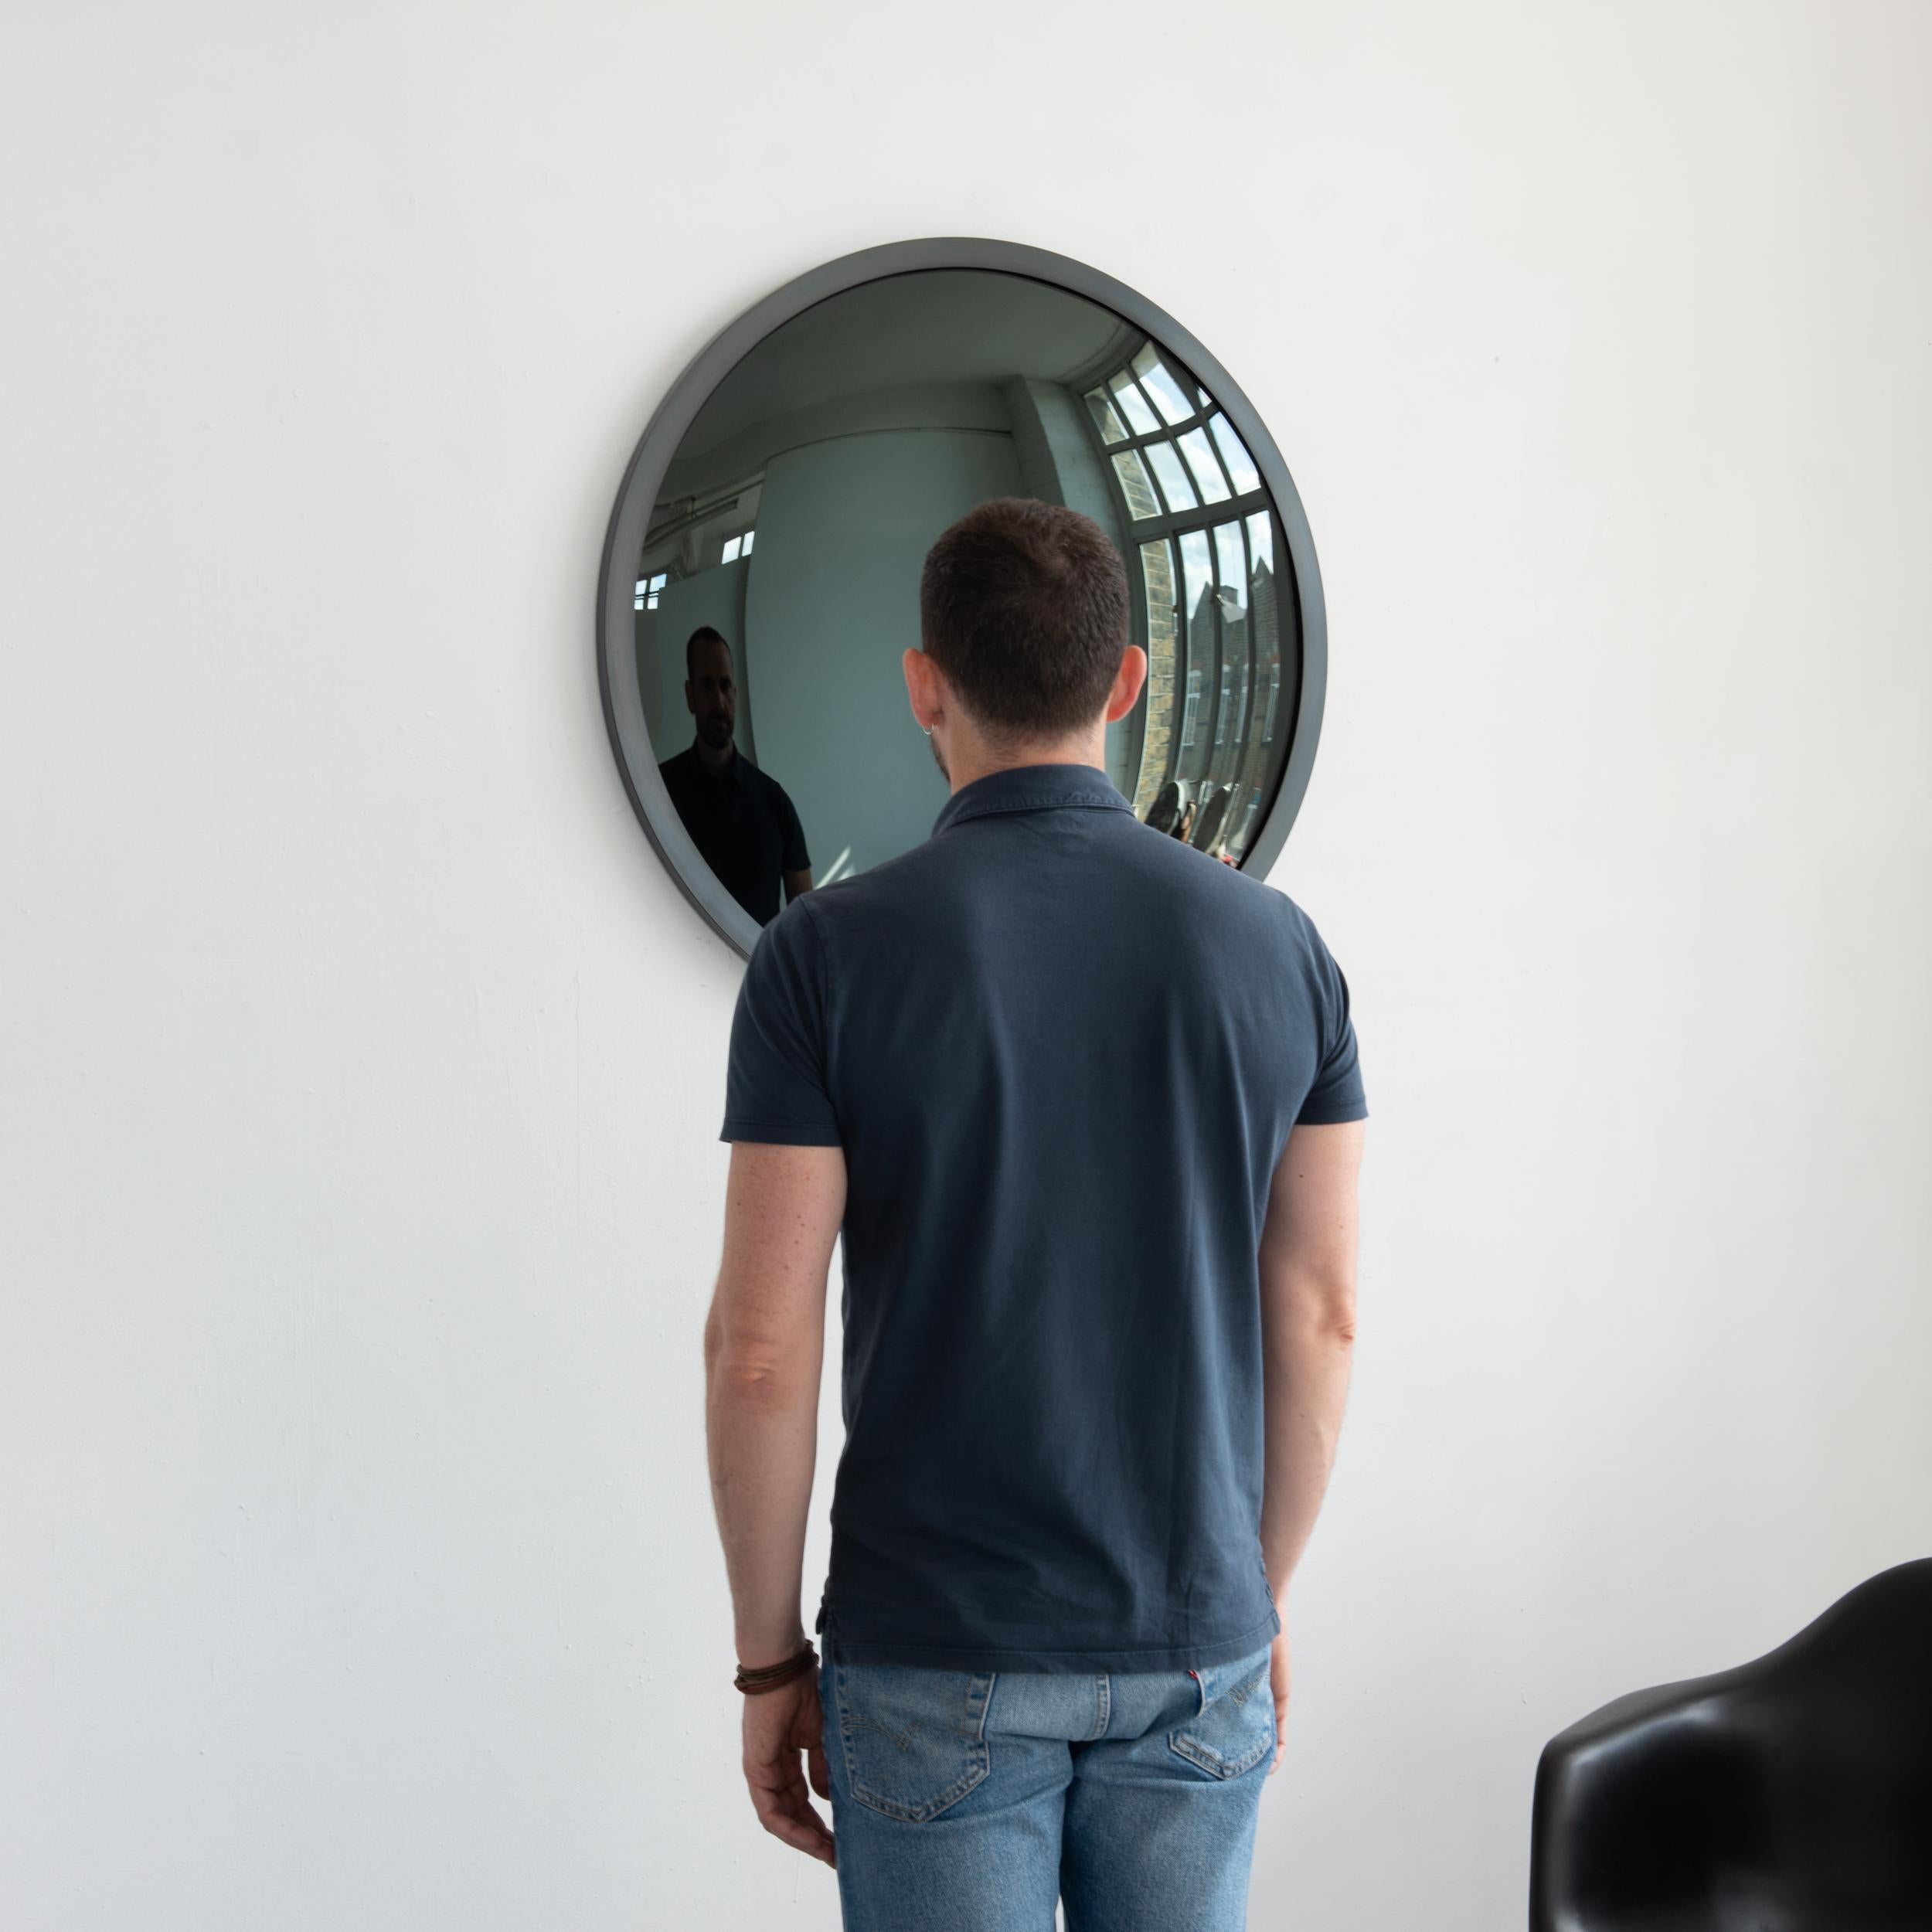 Contemporary In Stock Orbis Round Black Tinted Convex Mirror, Blackened Metal Frame, Large For Sale